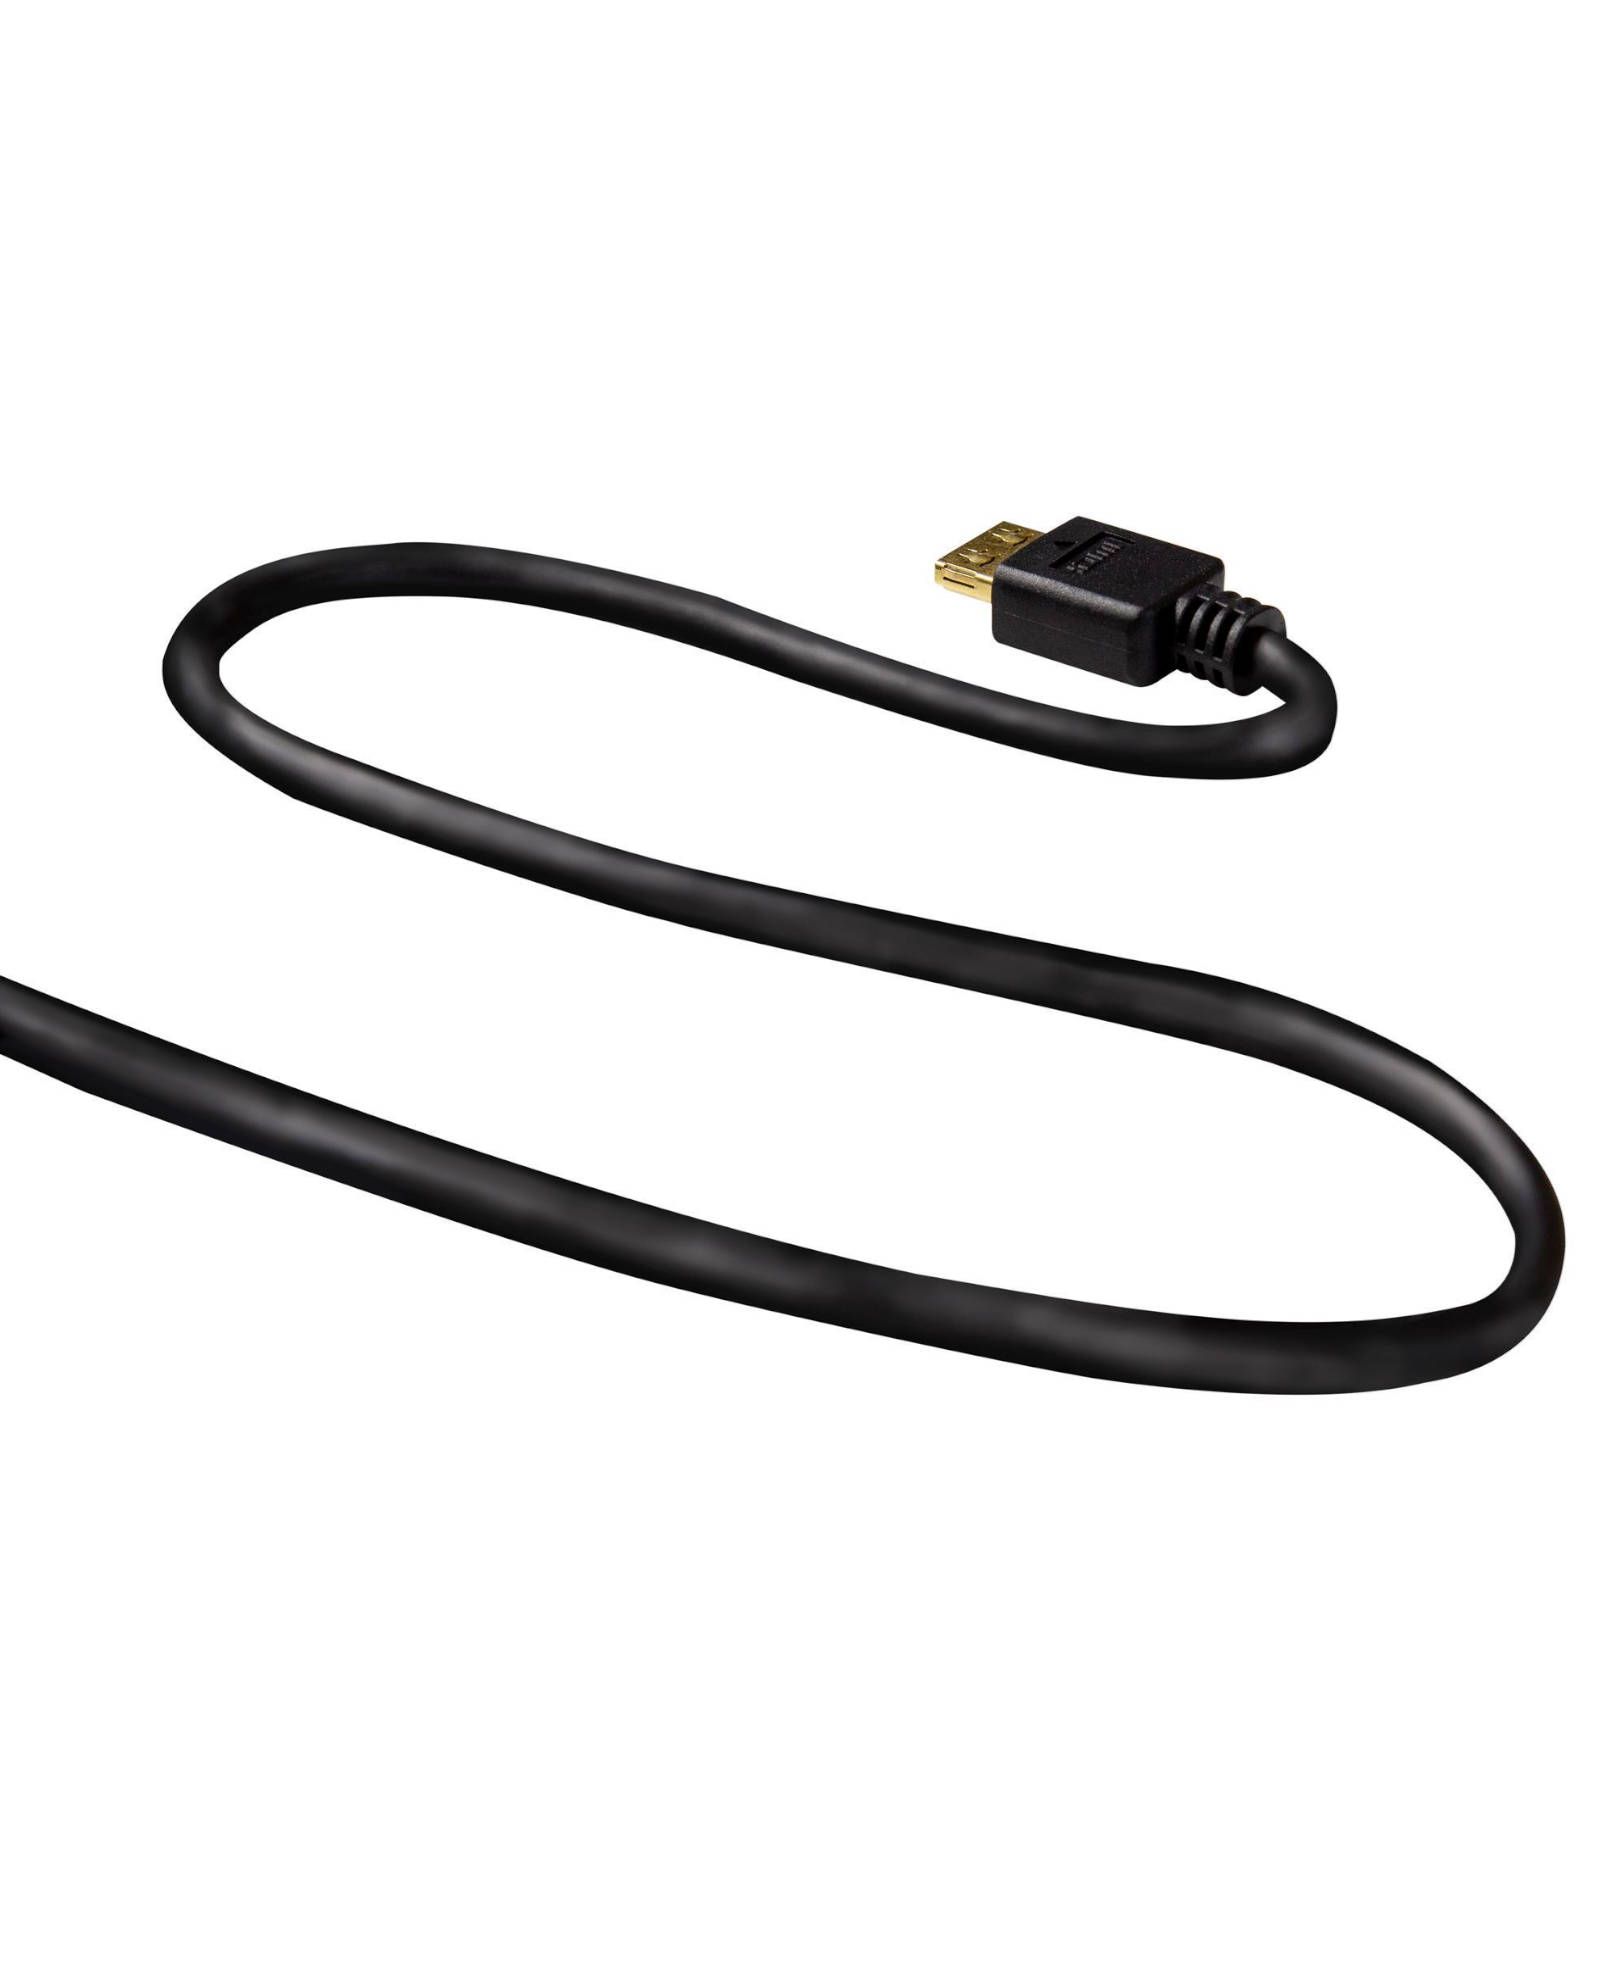 Hdmi High Speed Cable 7